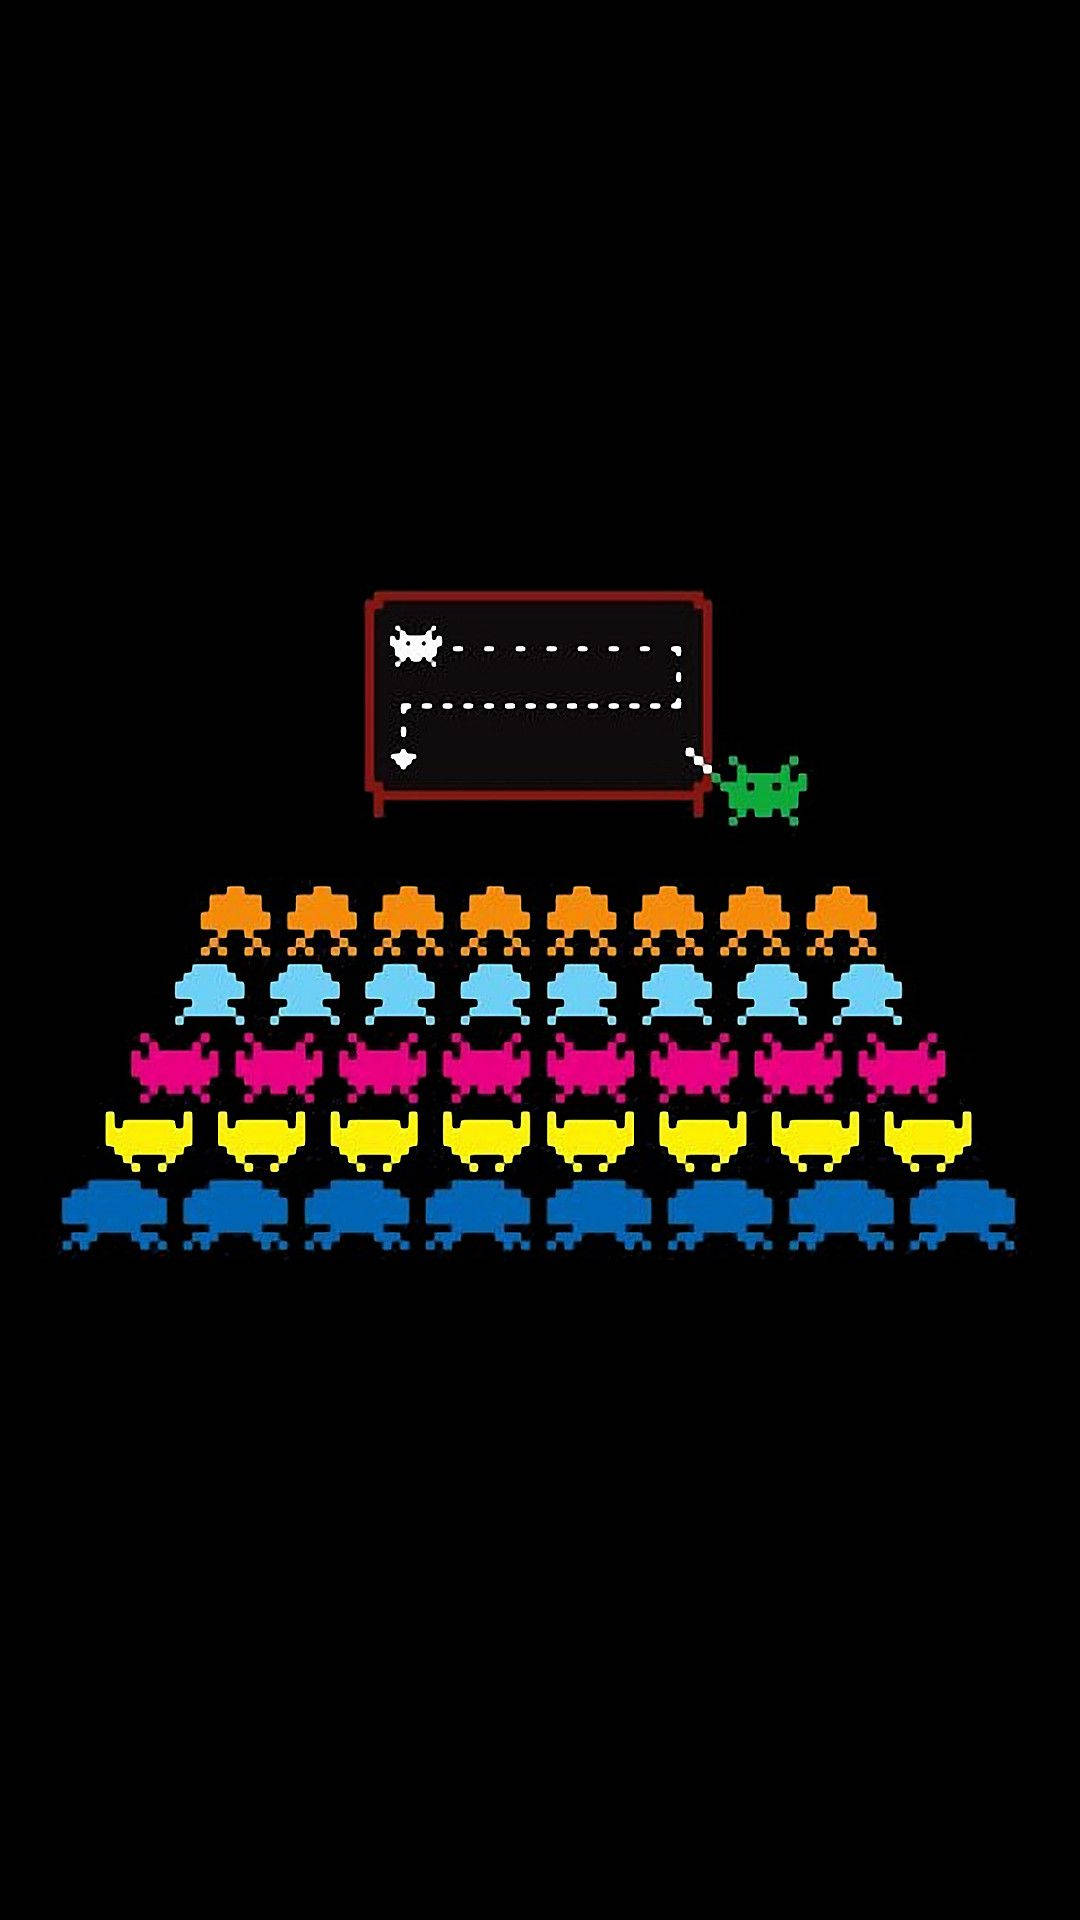 Aesthetic Retro Space Invaders